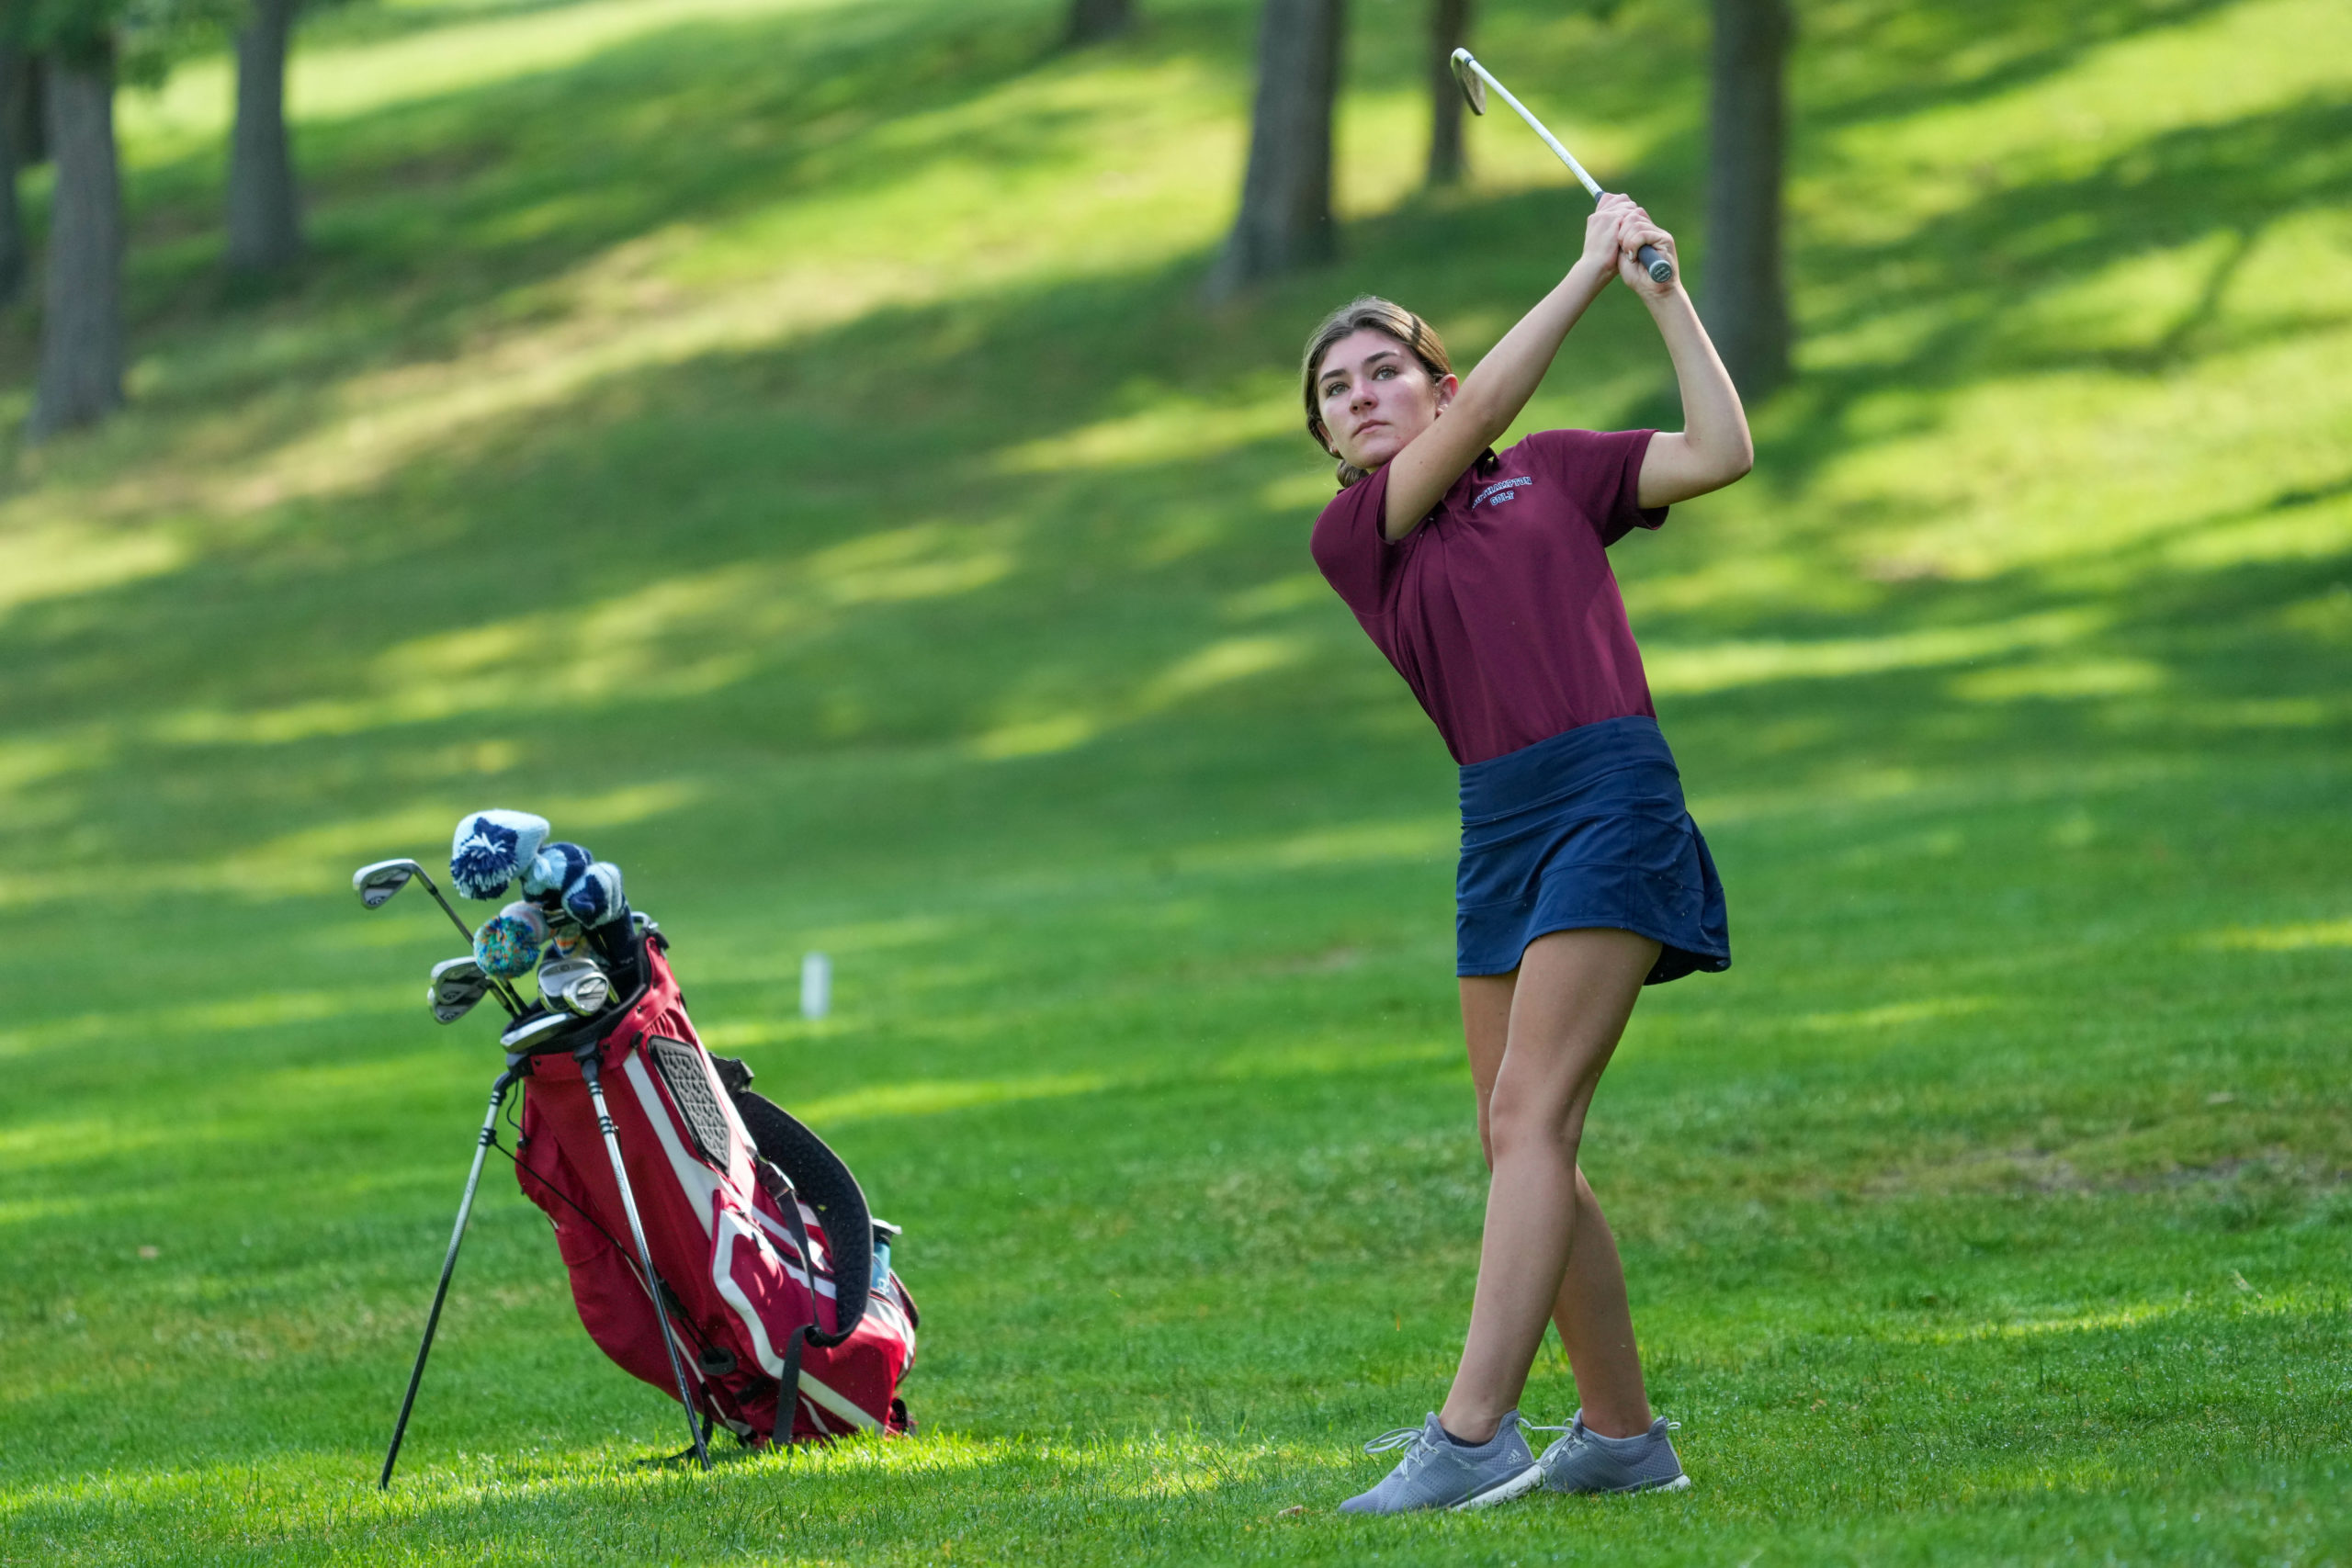 Southampton's Caroline Wilutis just missed the cut to move on to the second day of play on Wednesday, June 9.